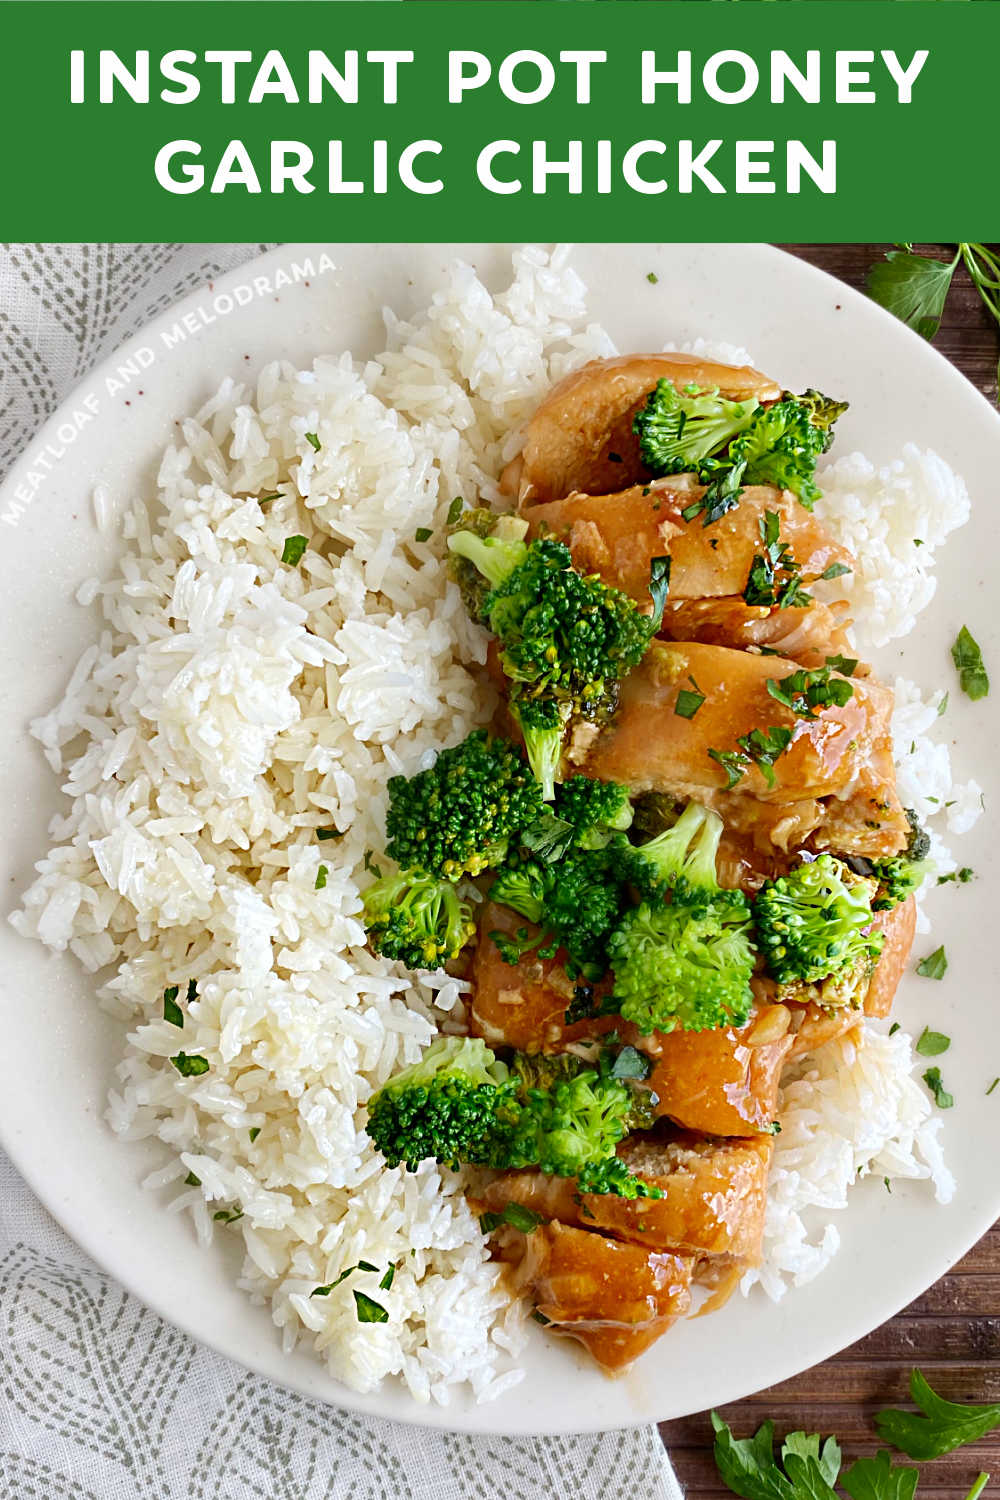 Instant Pot Honey Garlic Chicken (and Broccoli) is an easy recipe with skinless chicken breasts in a delicious homemade savory sauce. Add broccoli and serve with rice for a complete meal your whole family will love! via @meamel